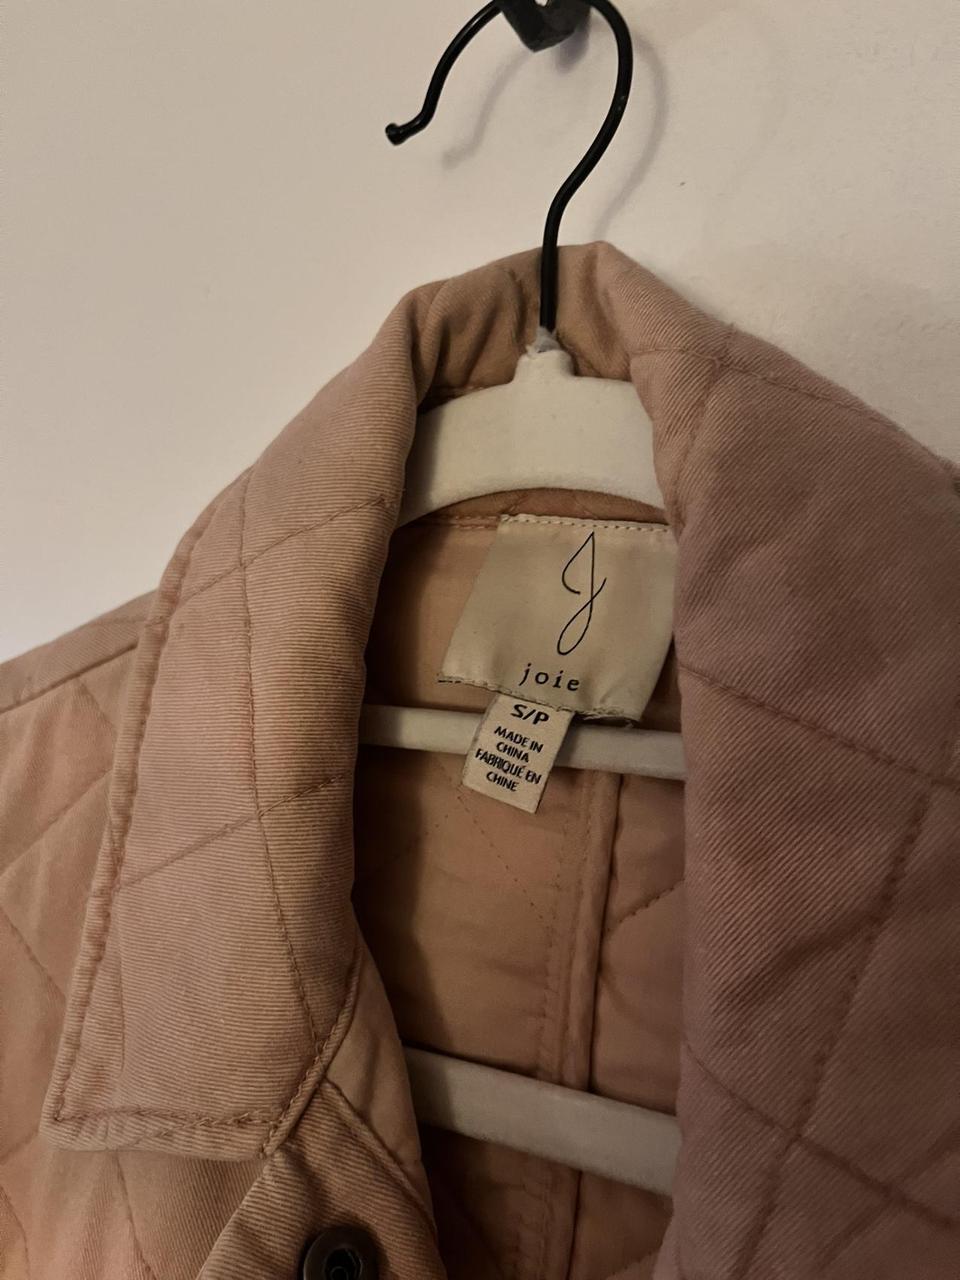 Joie Women's Pink and Tan Jacket (2)